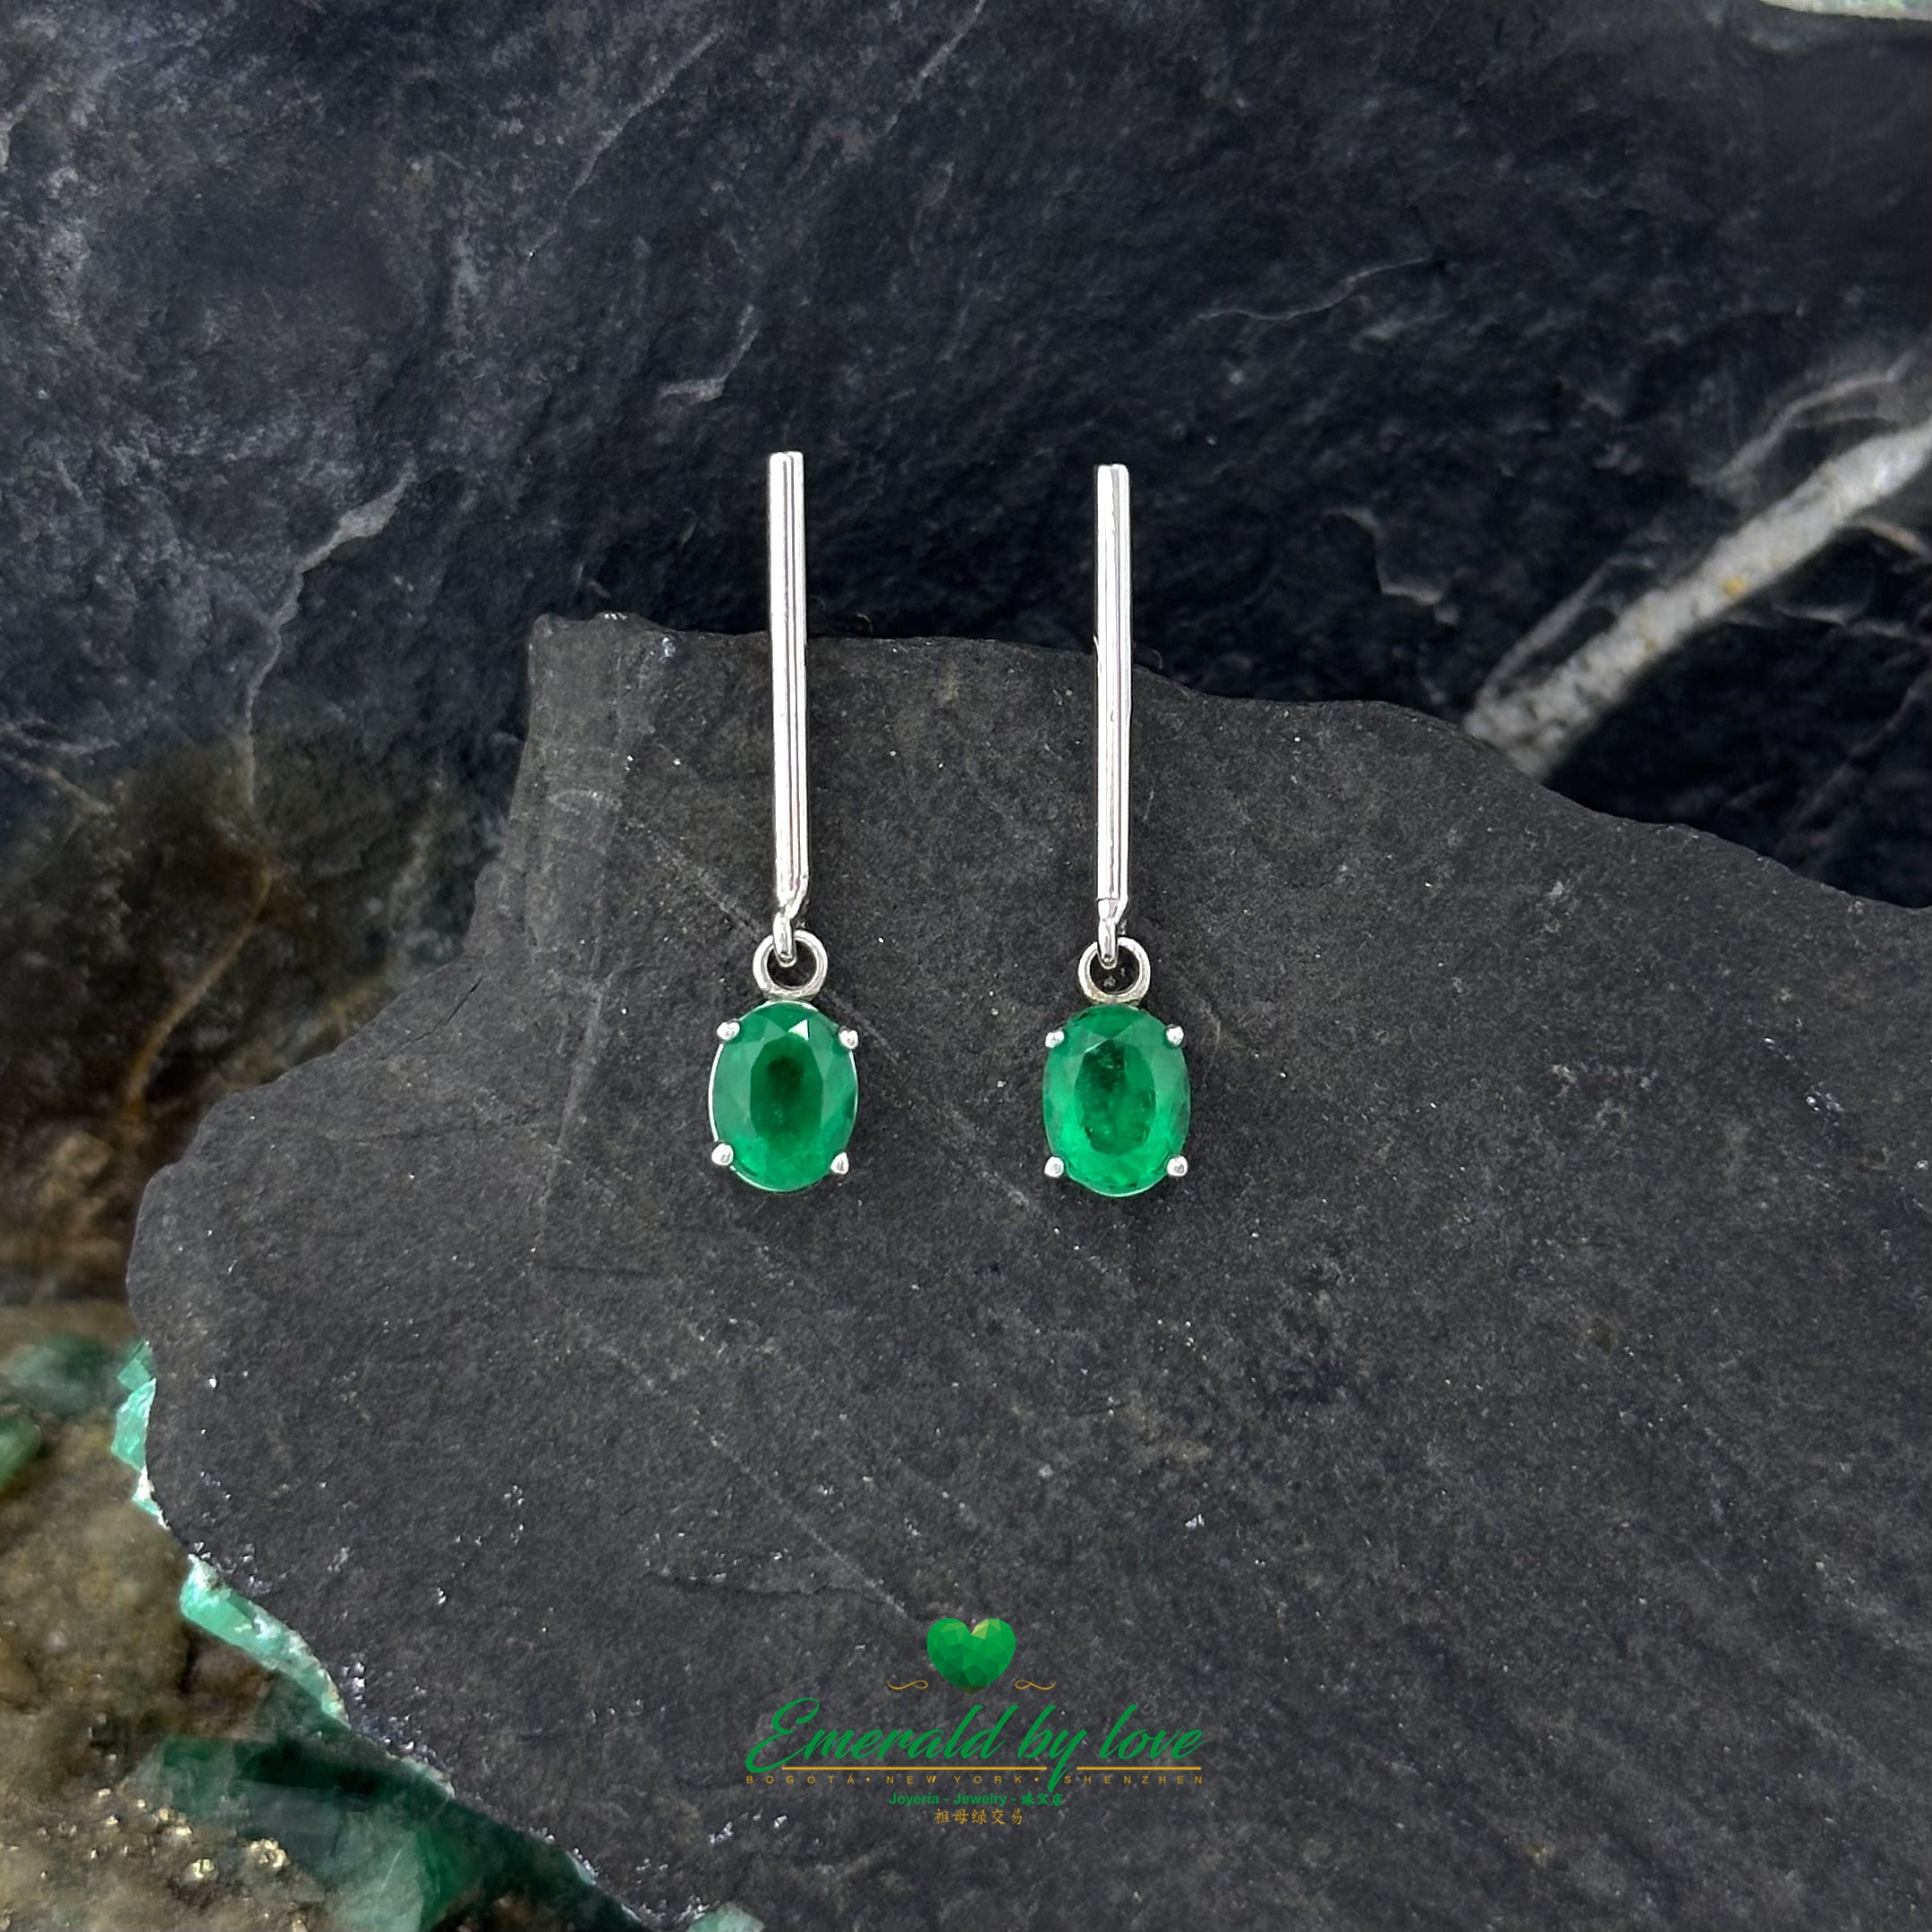 Timeless Glamour: Long White Gold Earrings with Oval Emeralds